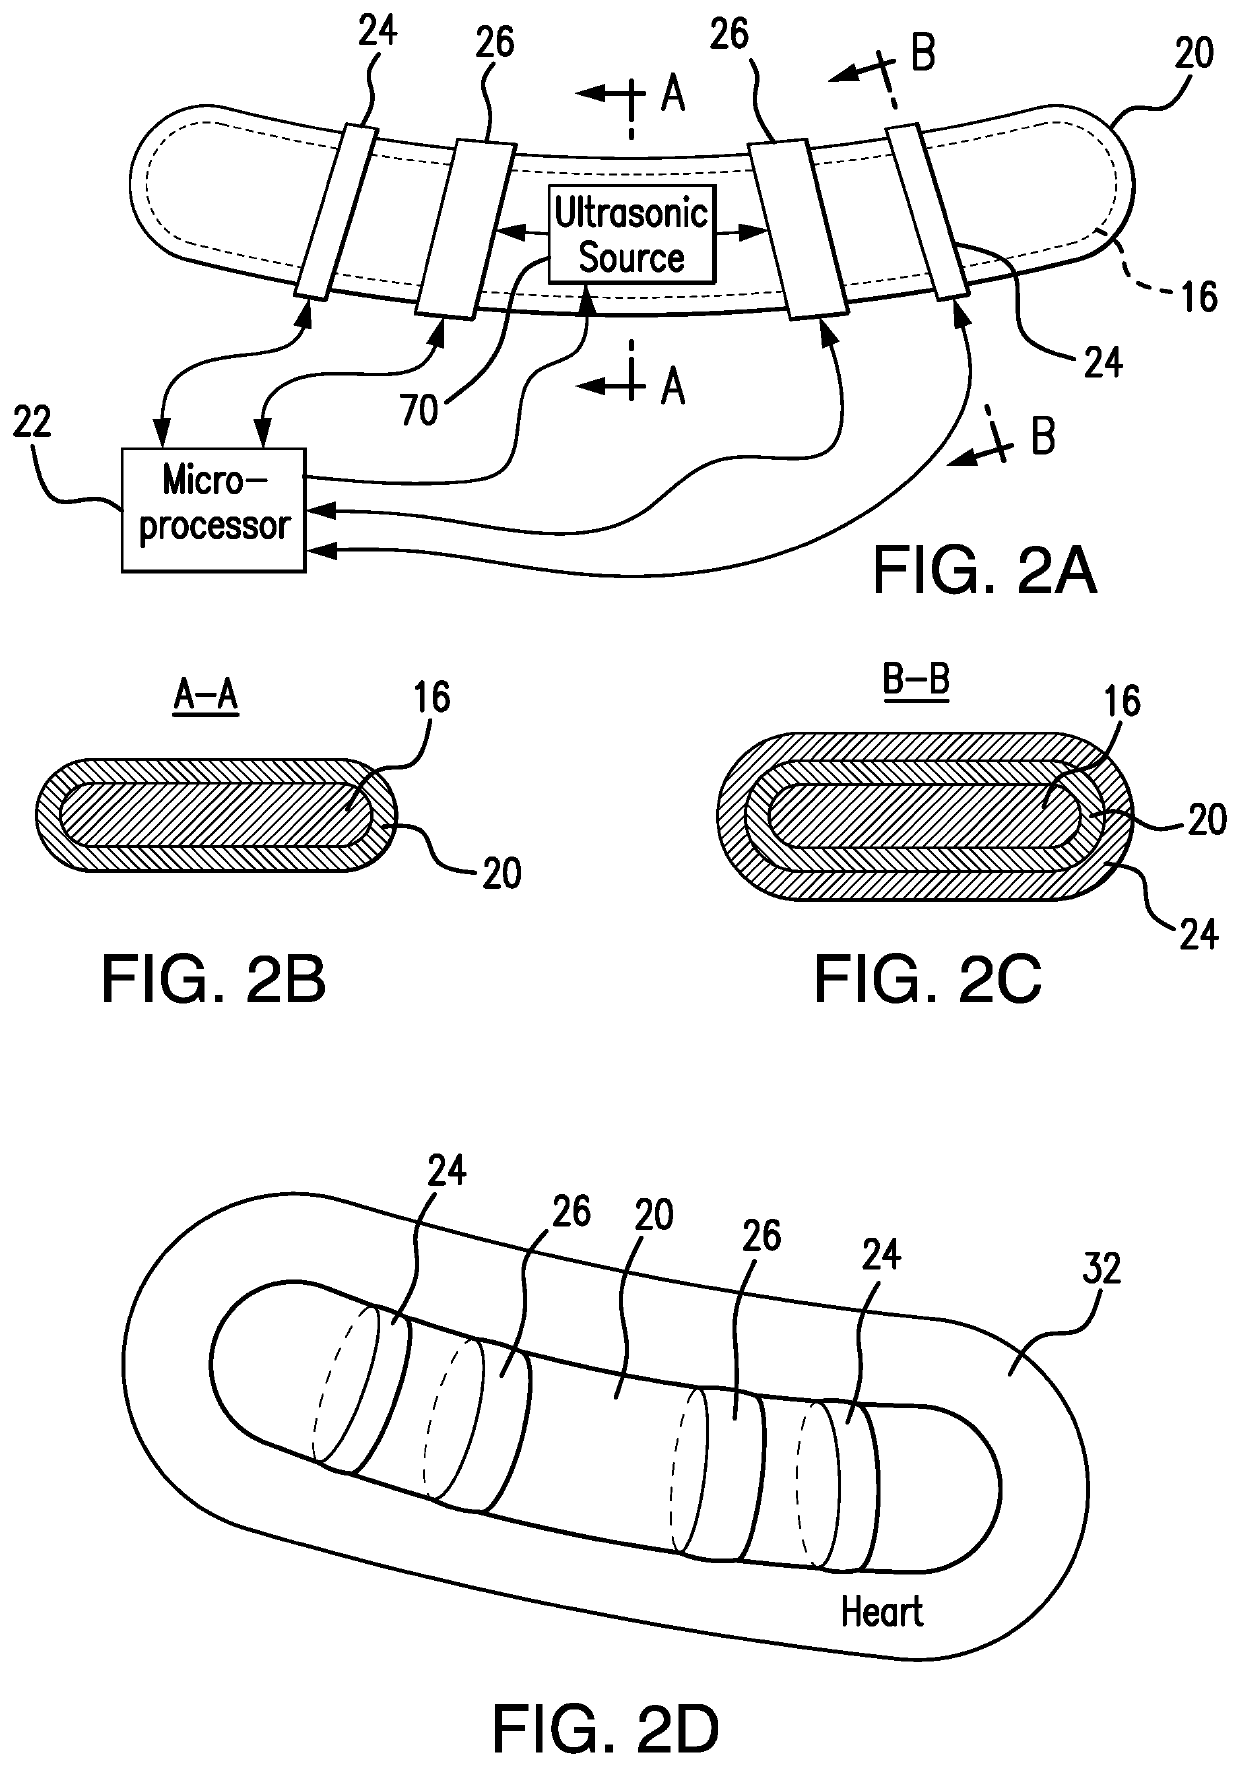 Pacemaker system equipped with a flexible intercostal generator